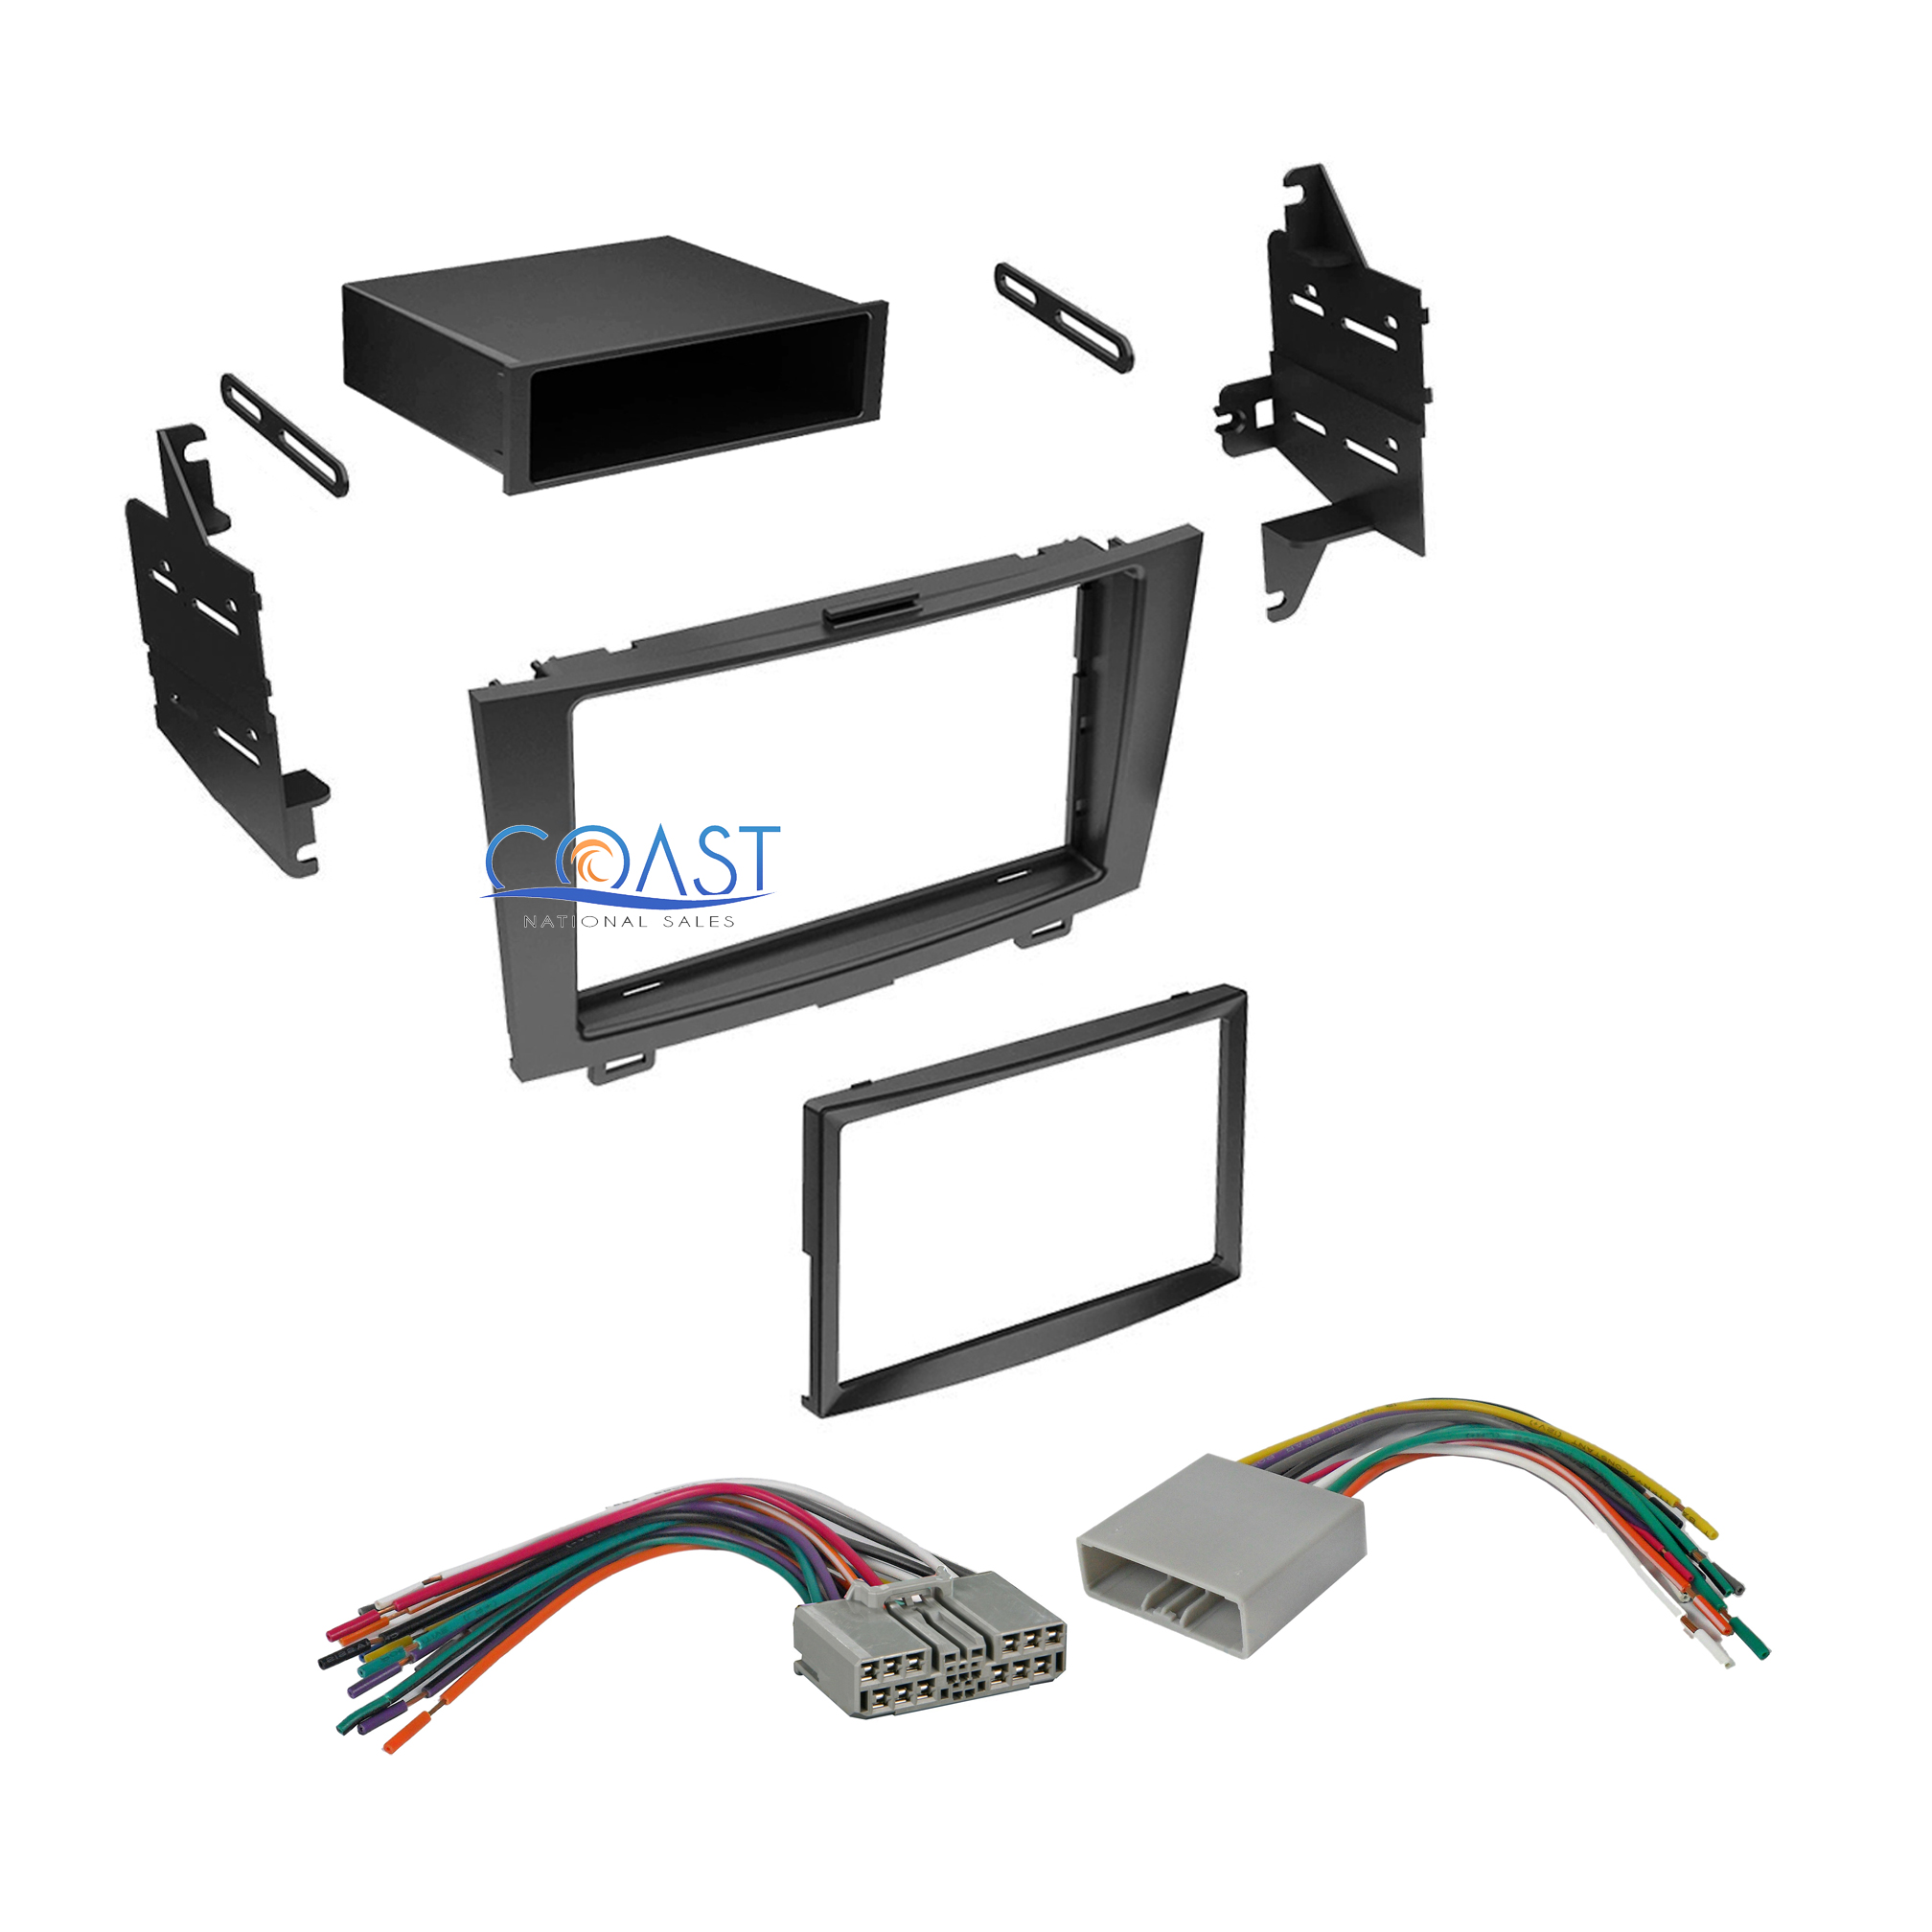 Single Double DIN Stereo Dash Kit + Wiring Harness for 2007-2010 Honda